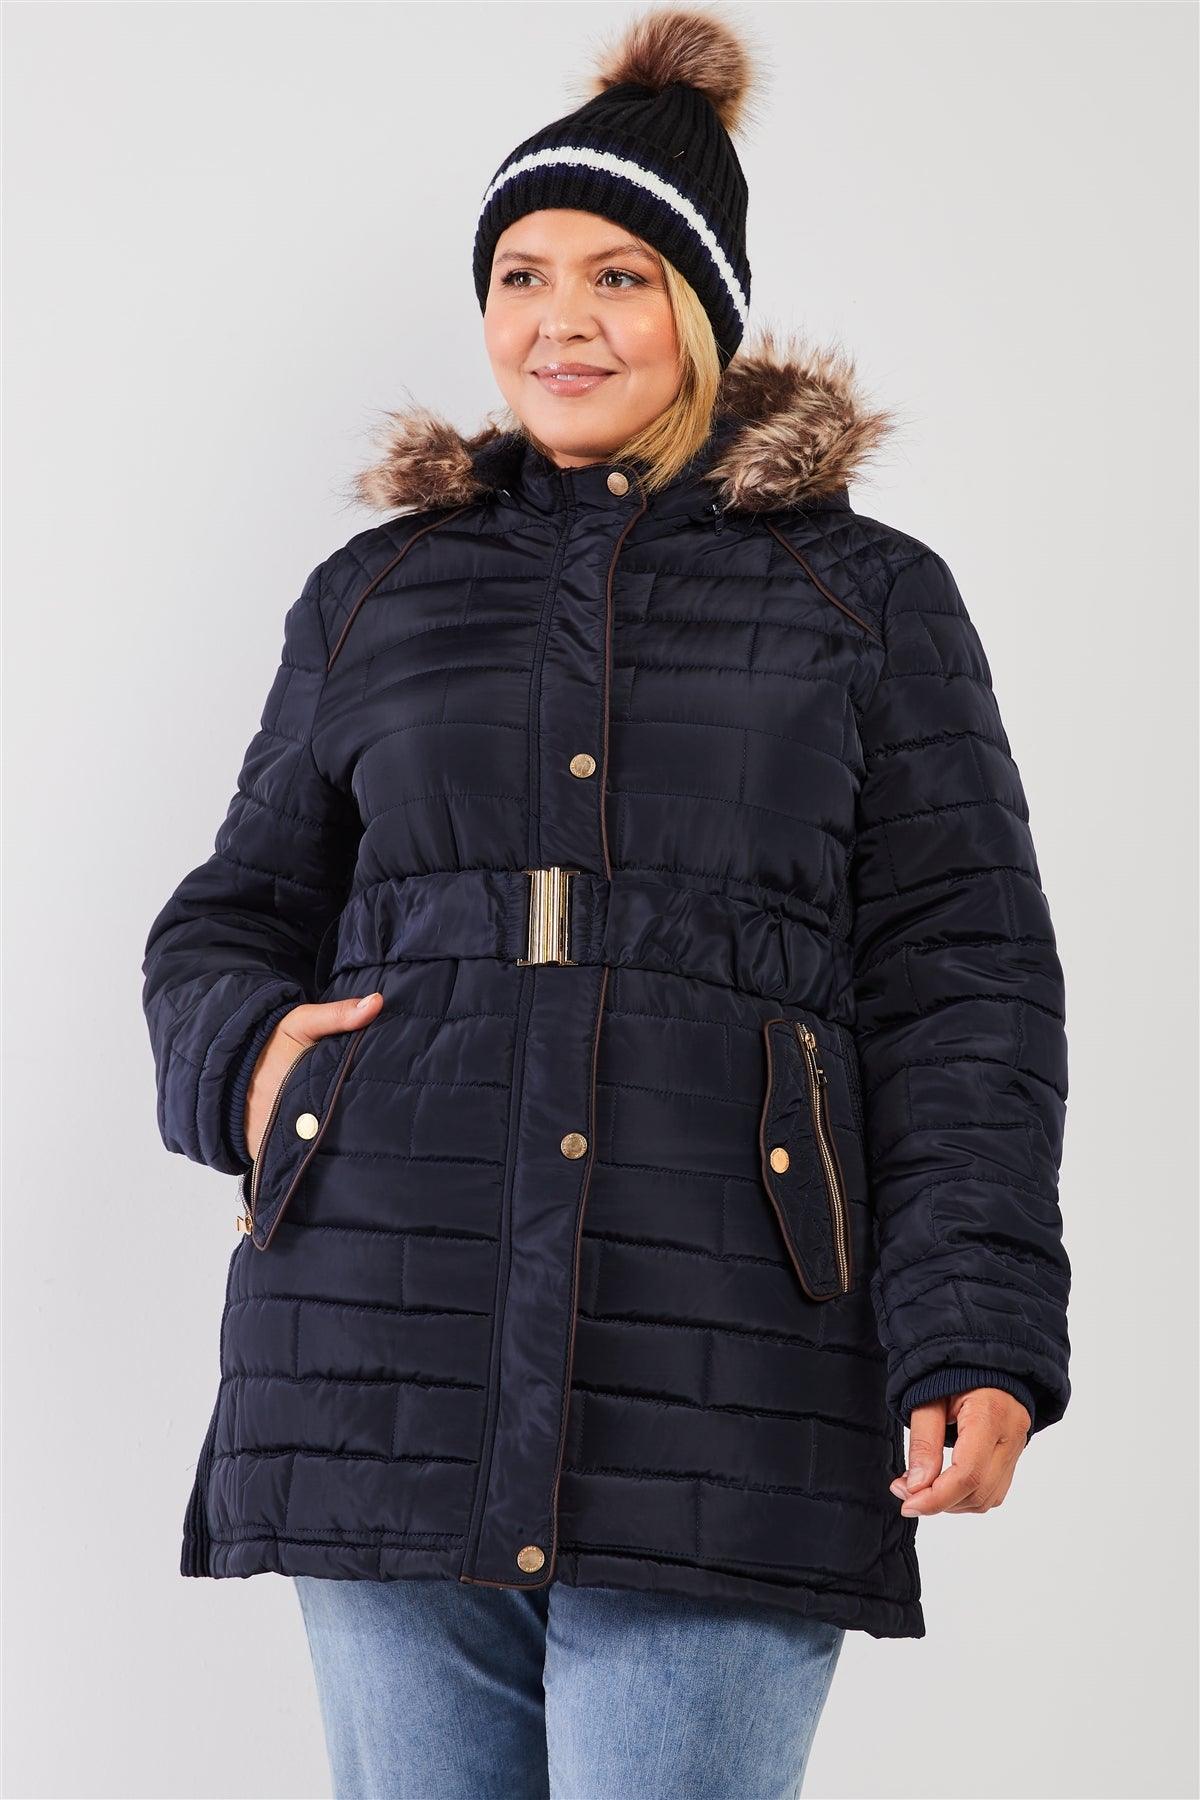 Junior Plus Navy Diamond Quilt Faux Fur Hood Belted Padded Long Puffer Jacket